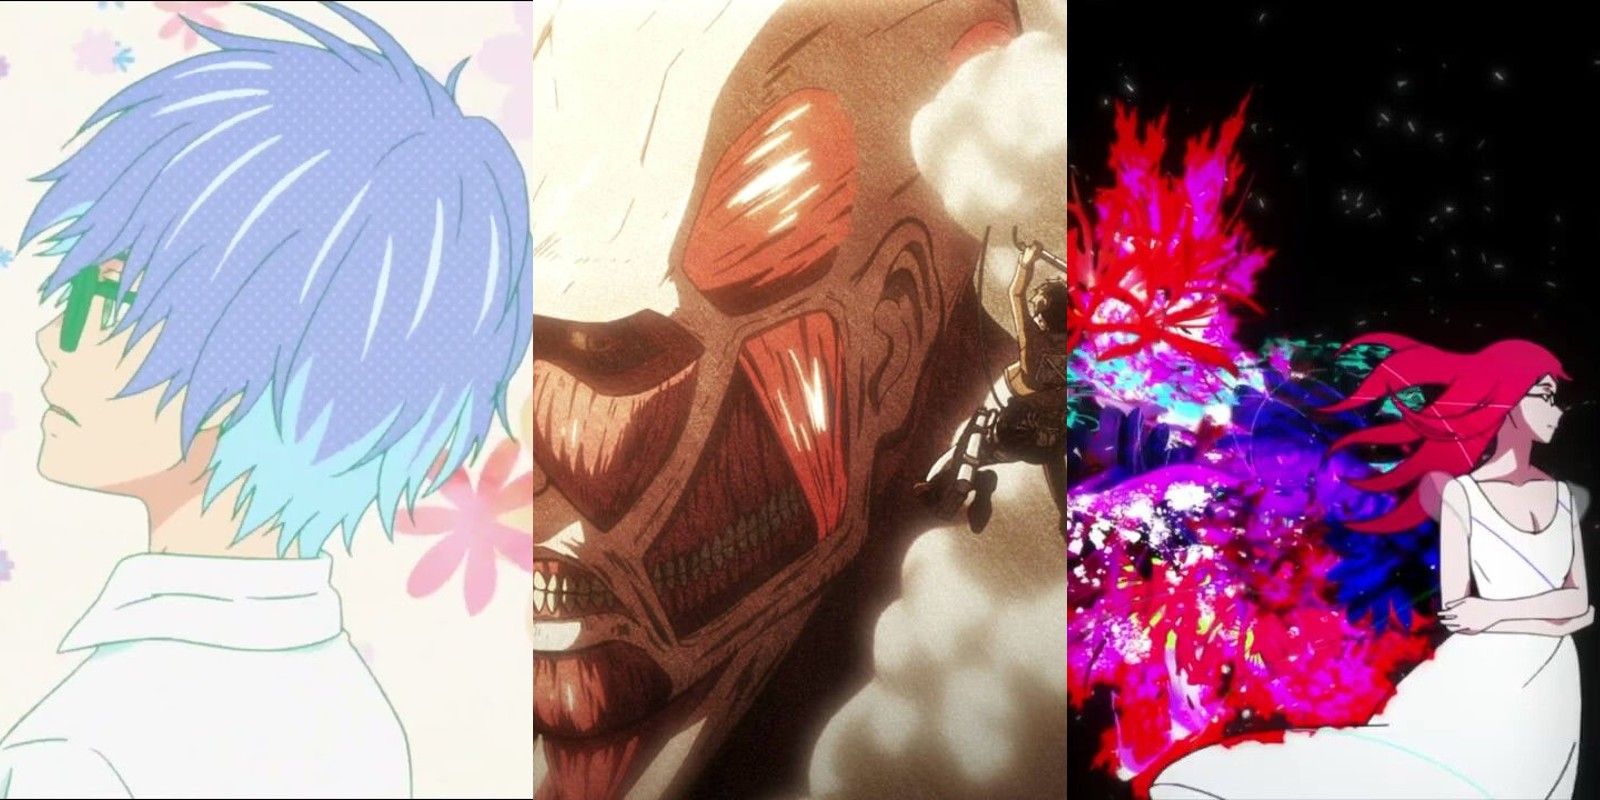 10 Anime Openings That Perfectly Fit The Story